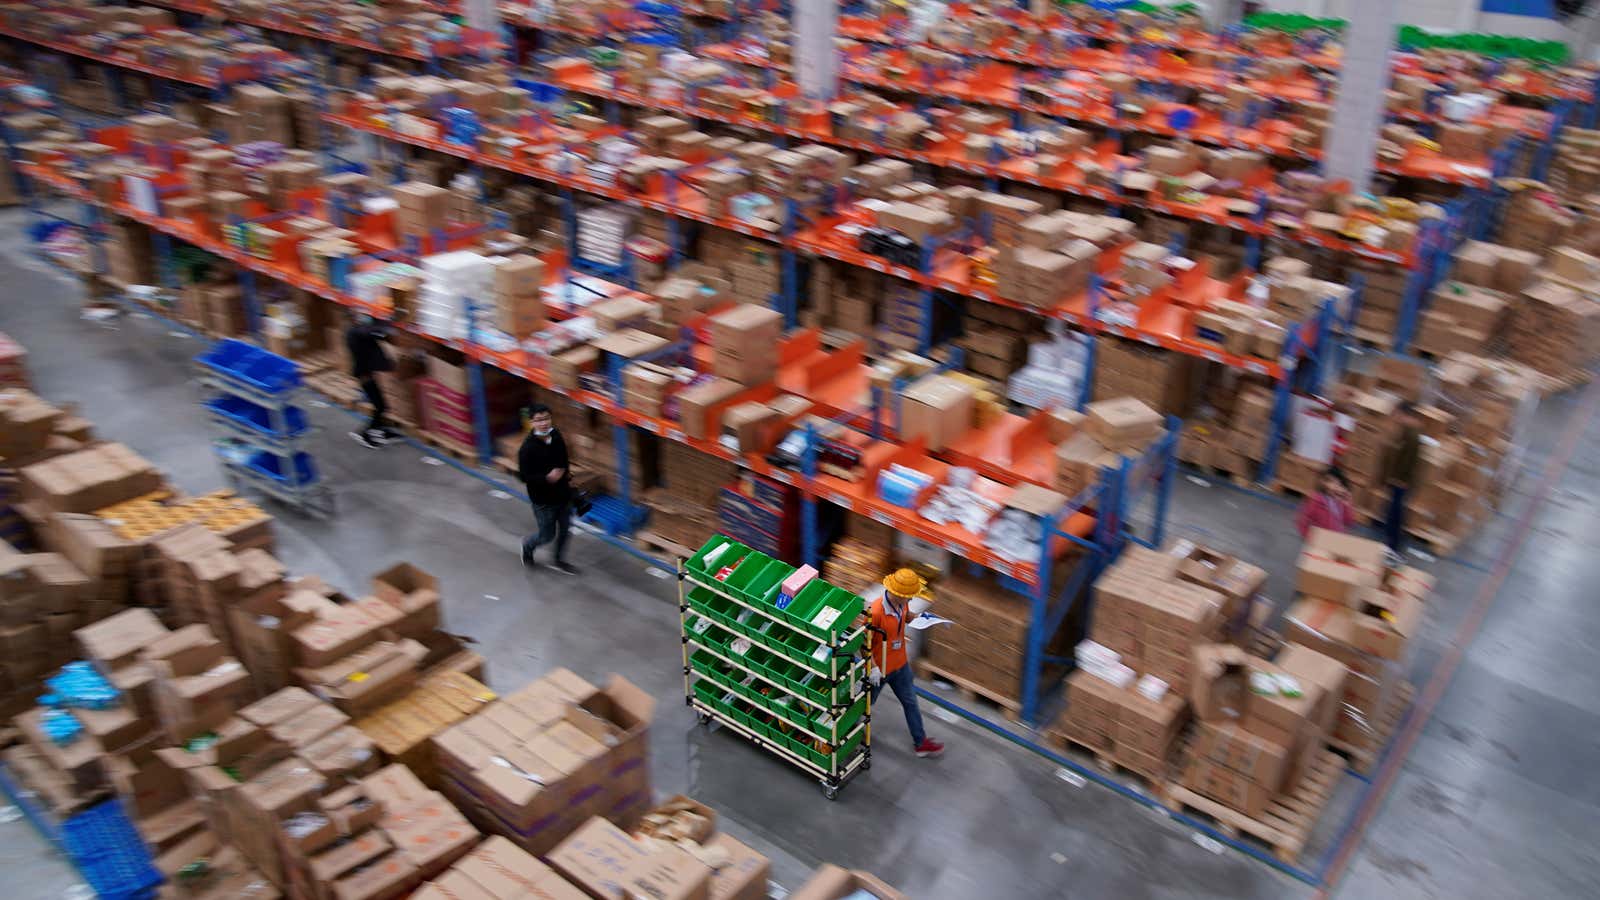 China wants its homegrown logistics giants to take on FedEx and UPS